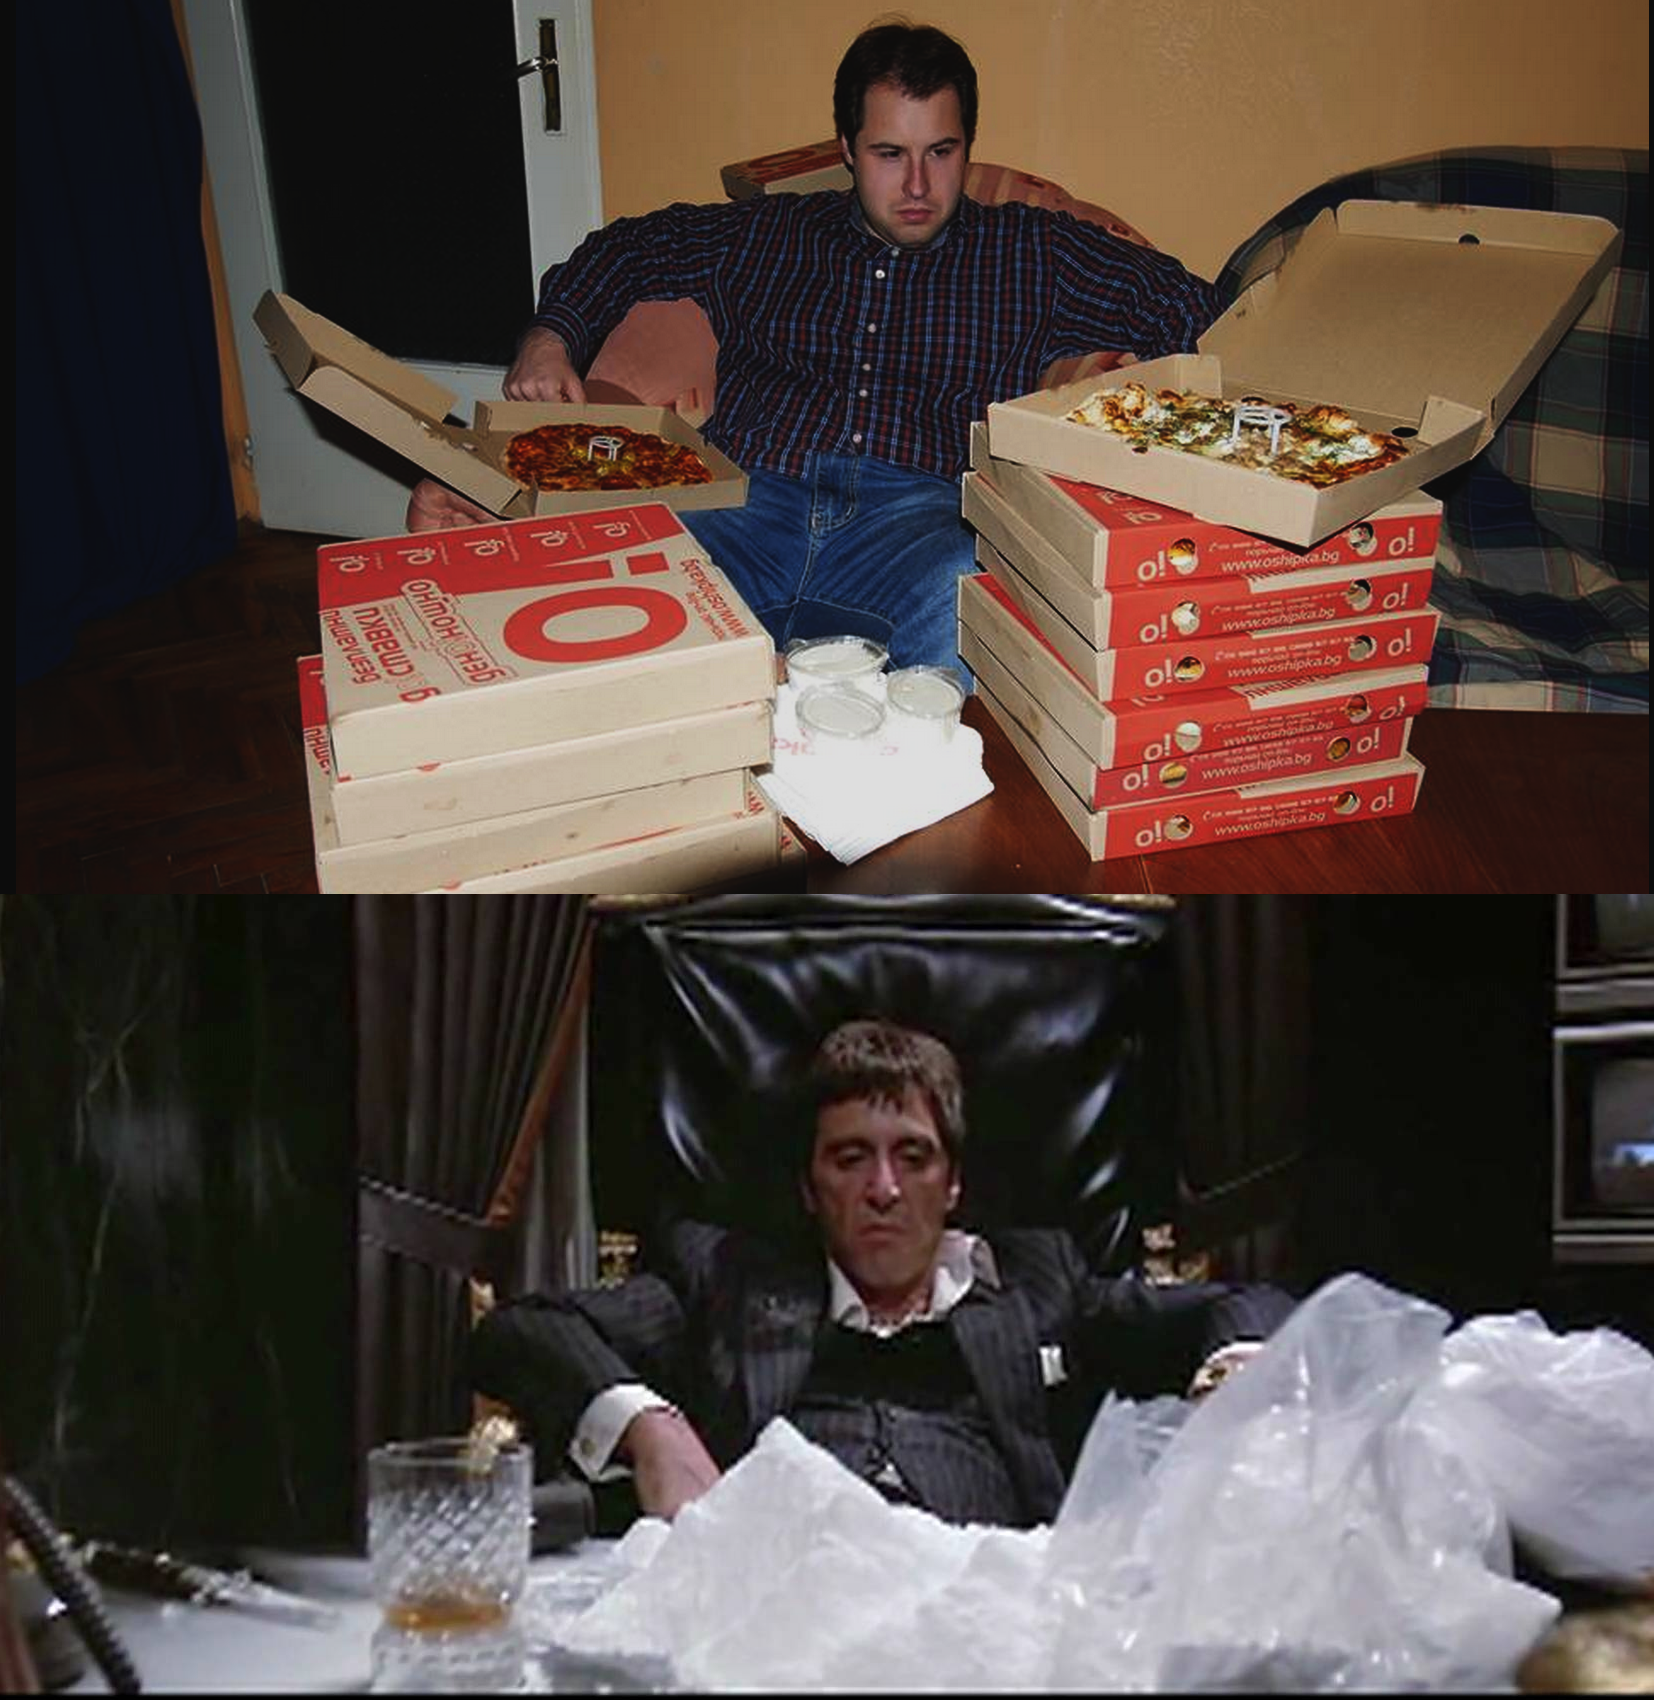 Man sitting with his pizza boxes juxtaposed to a screen shot on Tony Montana from Scarface.